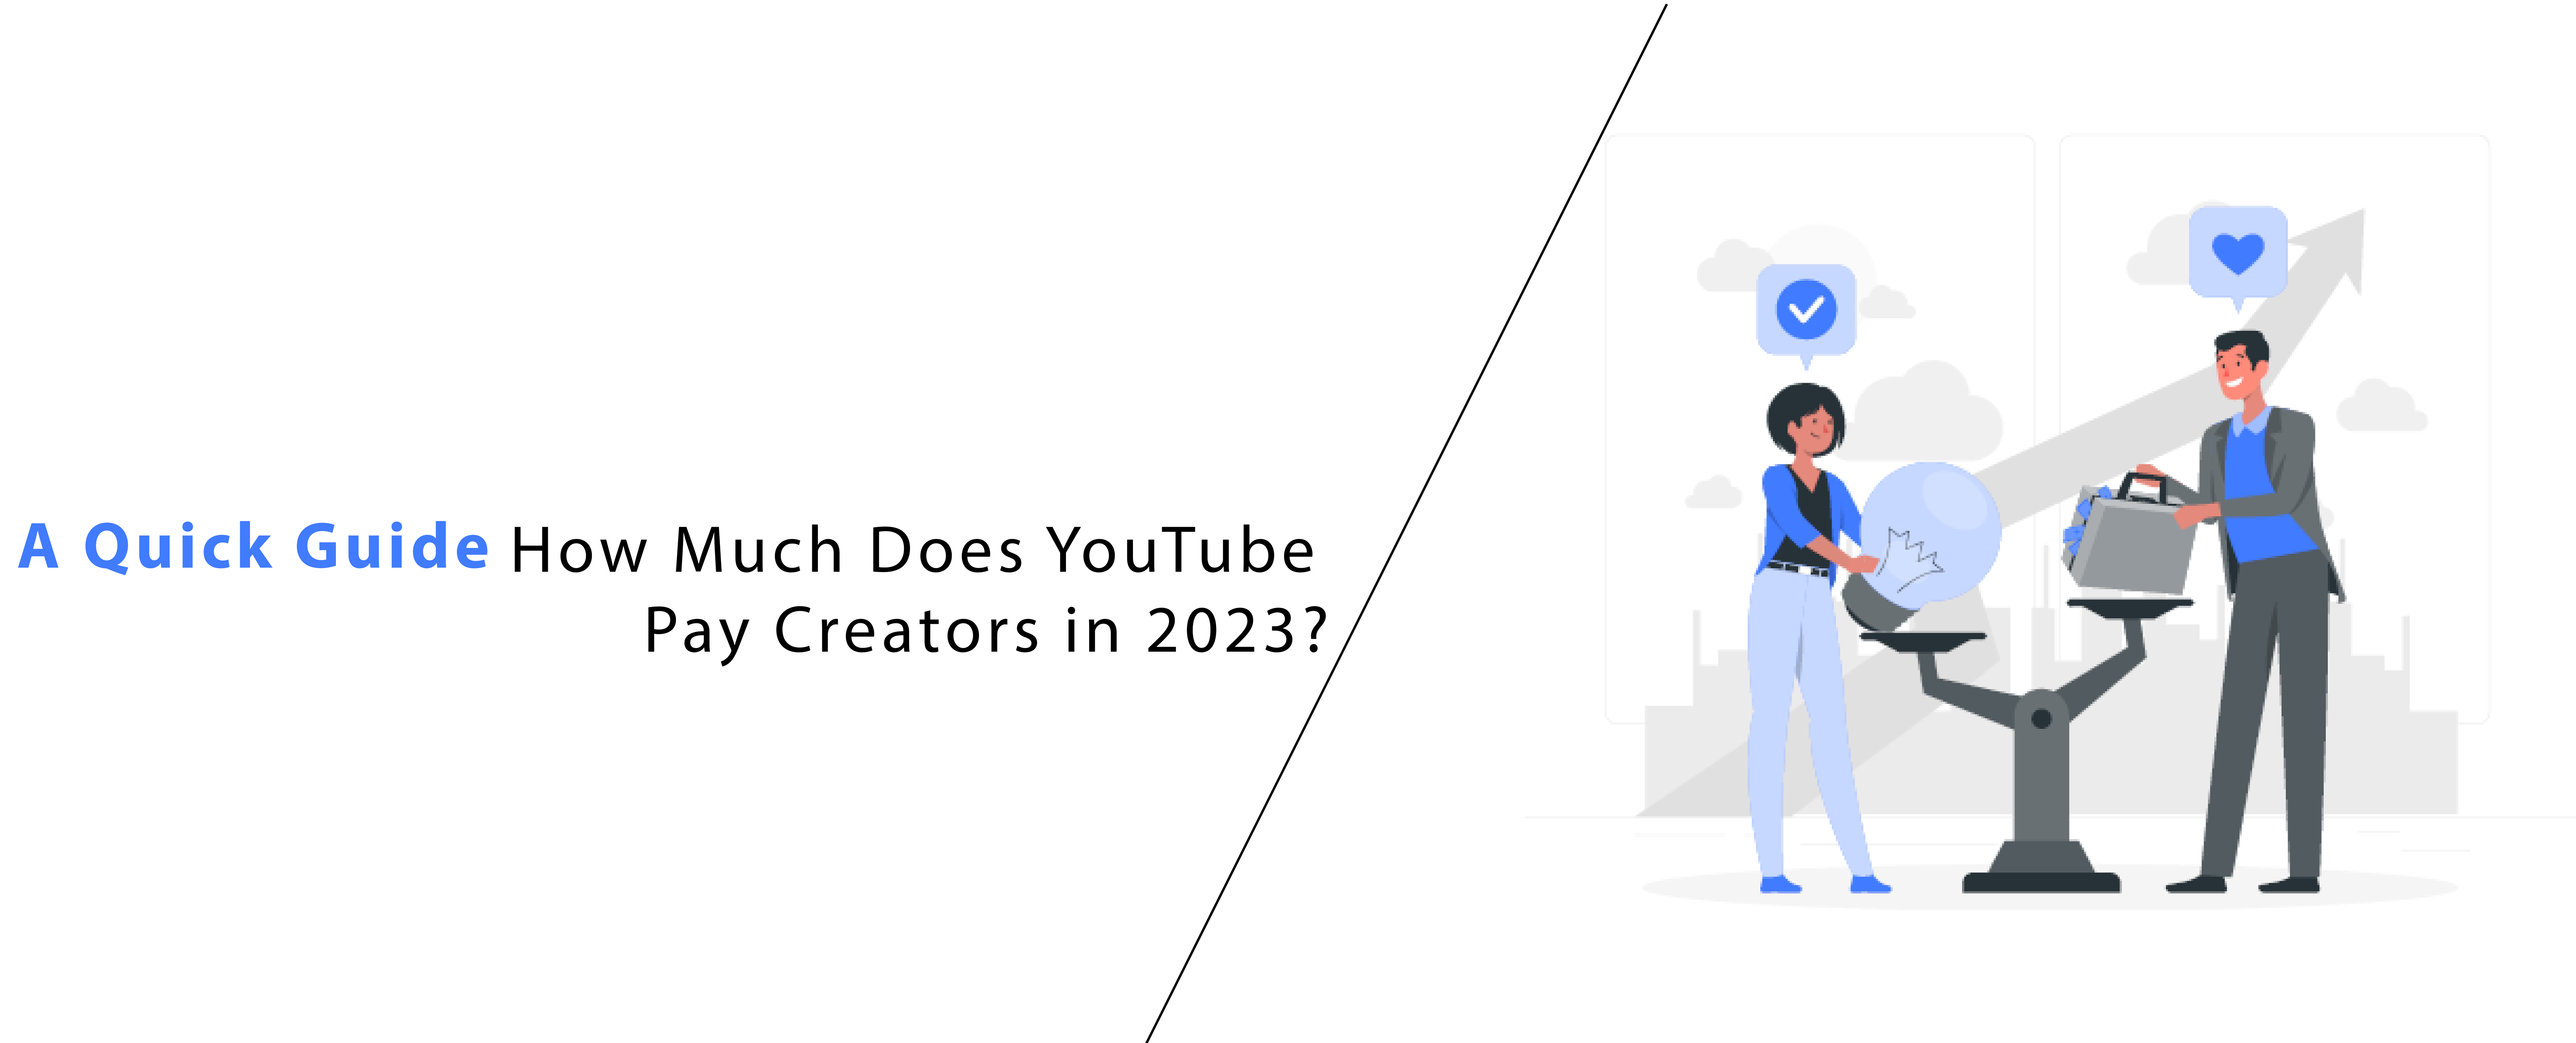 How Much Does YouTube Pay Creators in 2023?